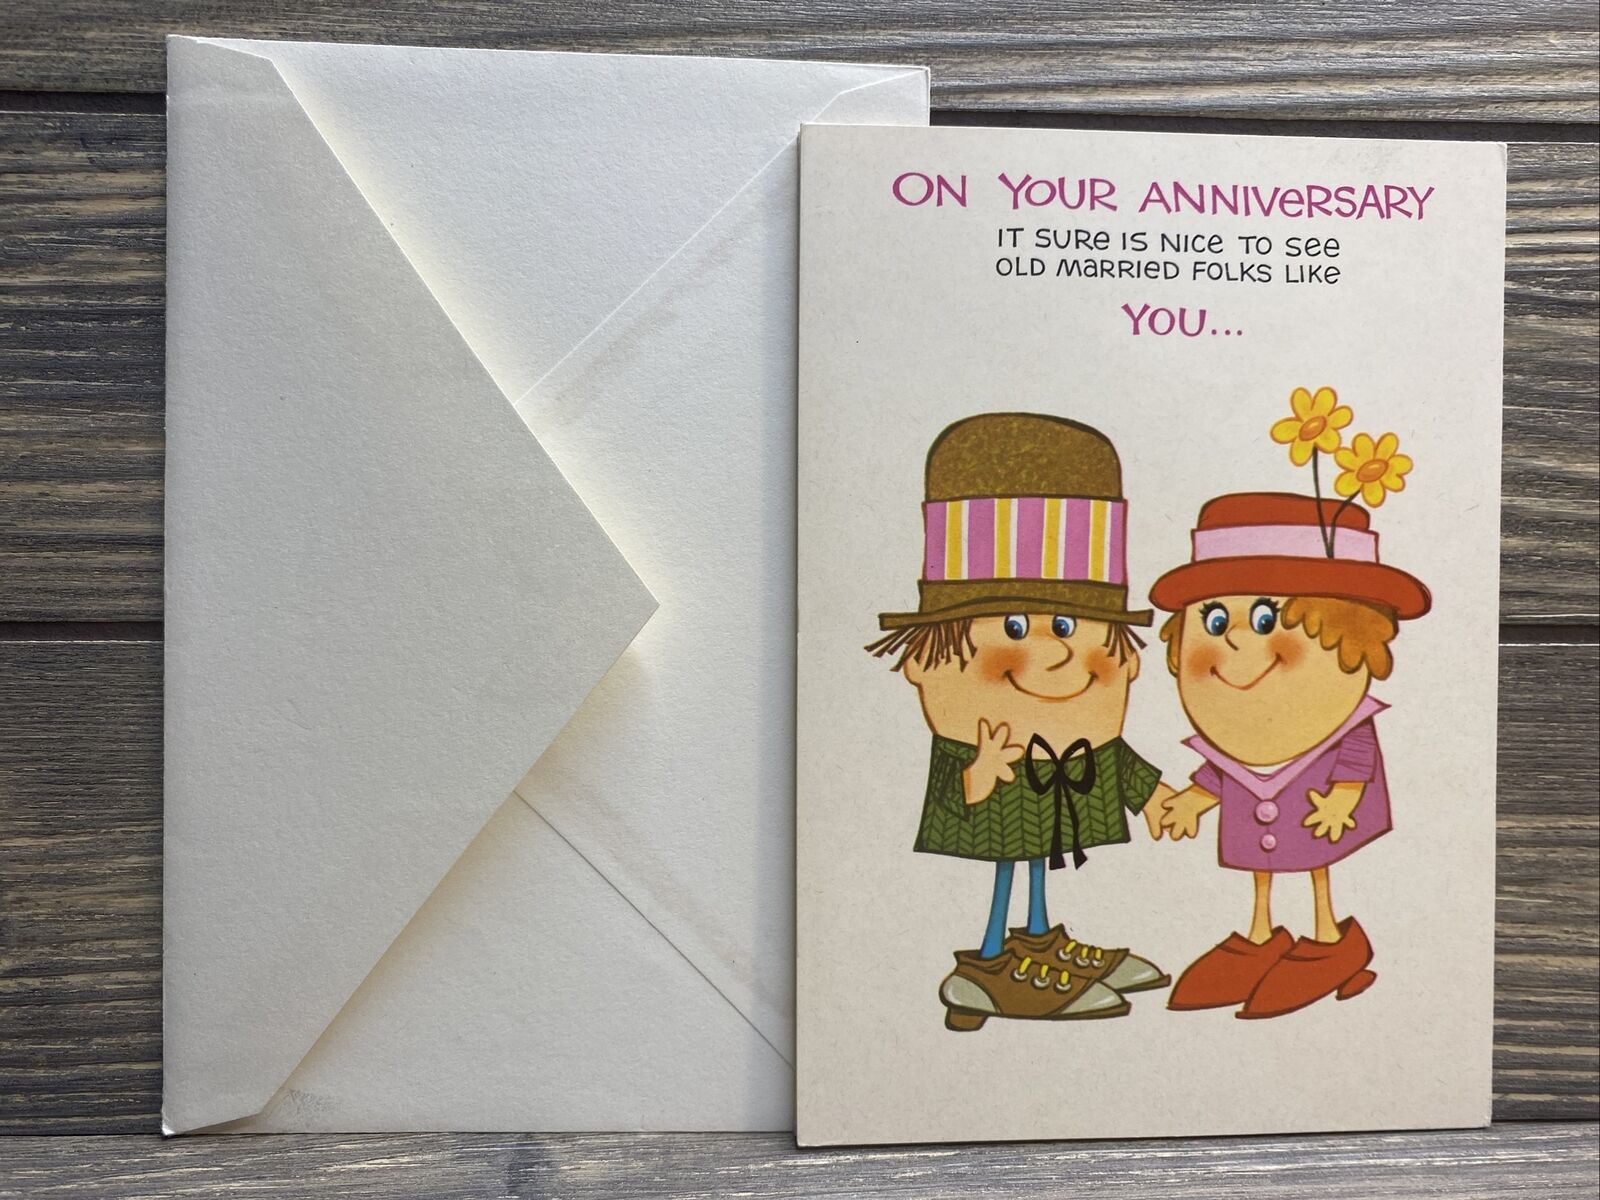 Vintage Rust Craft Greeting Card Anniversary Old Married Folks Couple